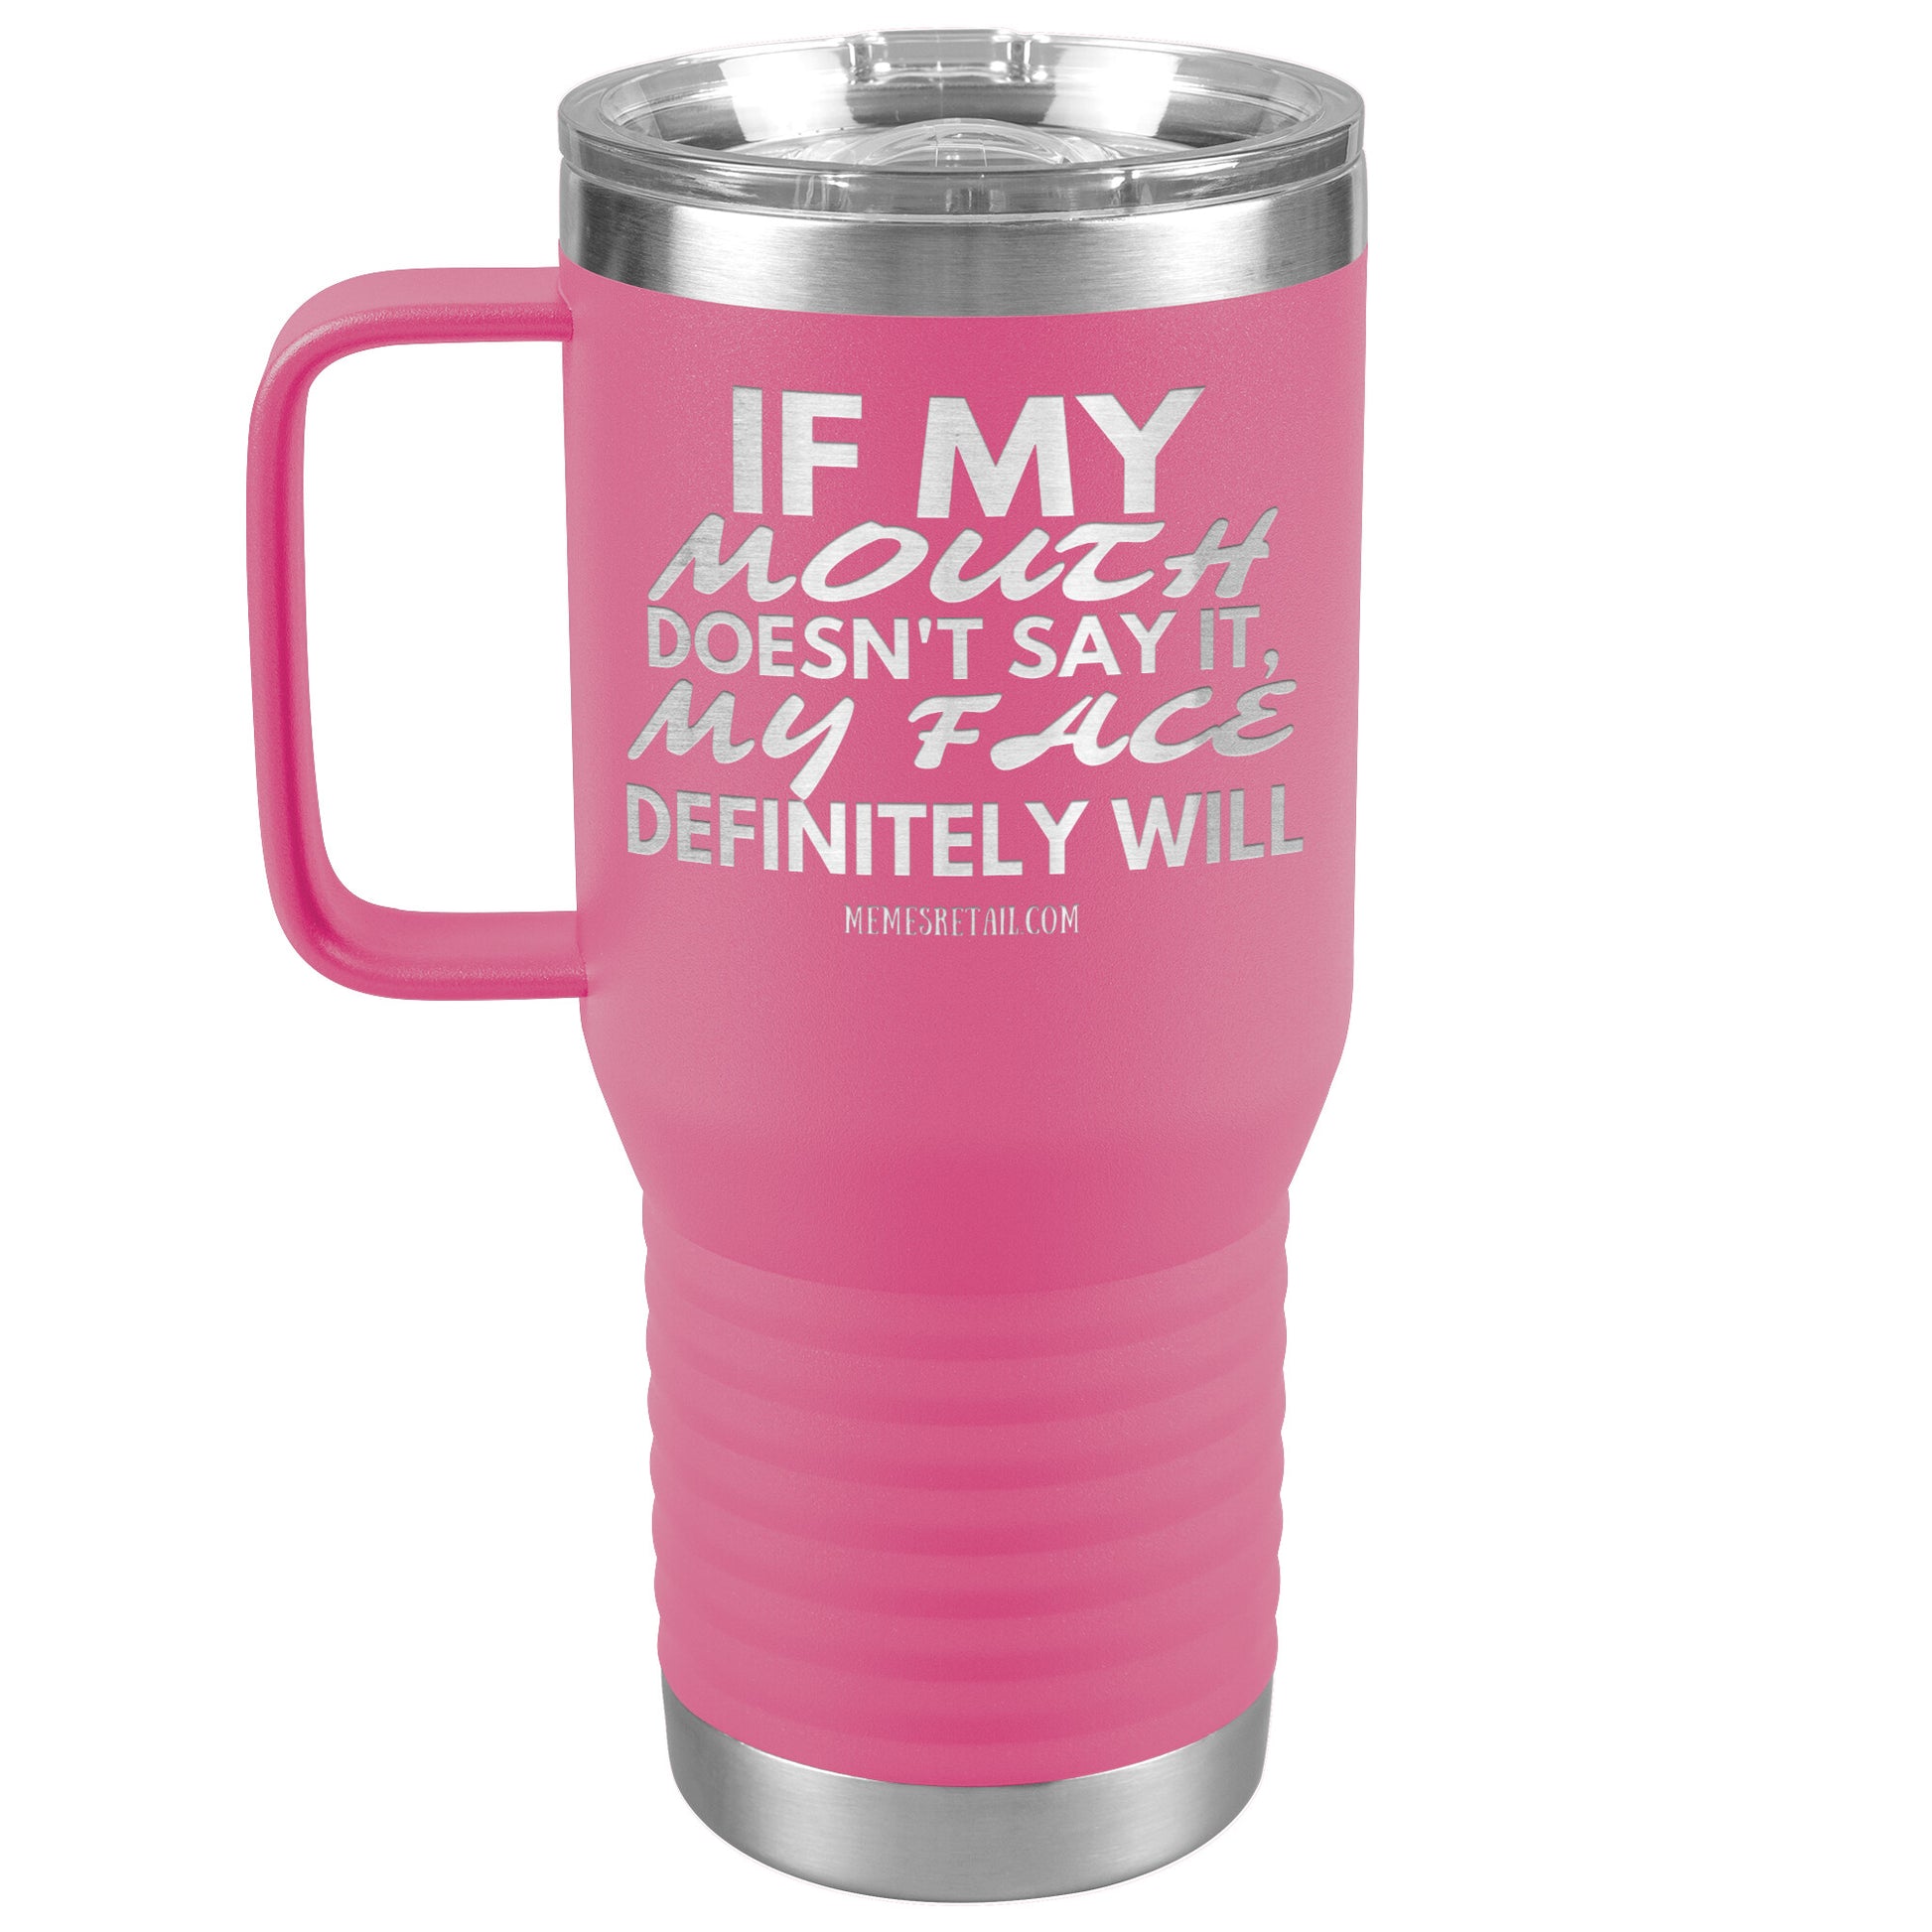 If my mouth doesn't say it, my face definitely will Tumblers, 20oz Travel Tumbler / Pink - MemesRetail.com